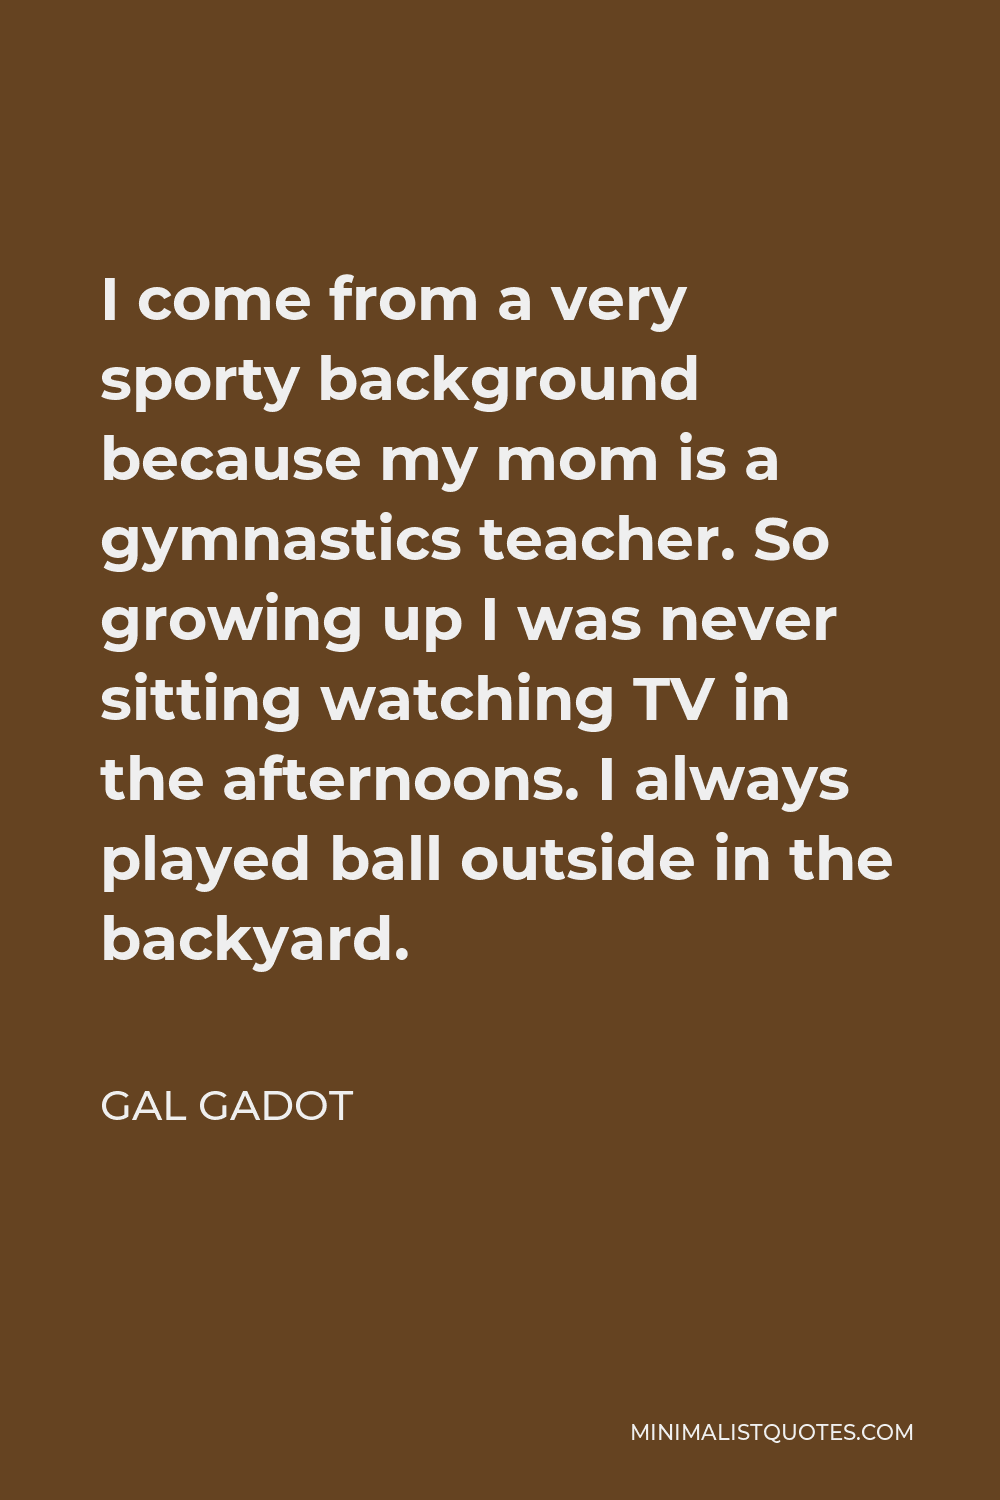 Gal Gadot Quote - I come from a very sporty background because my mom is a gymnastics teacher. So growing up I was never sitting watching TV in the afternoons. I always played ball outside in the backyard.